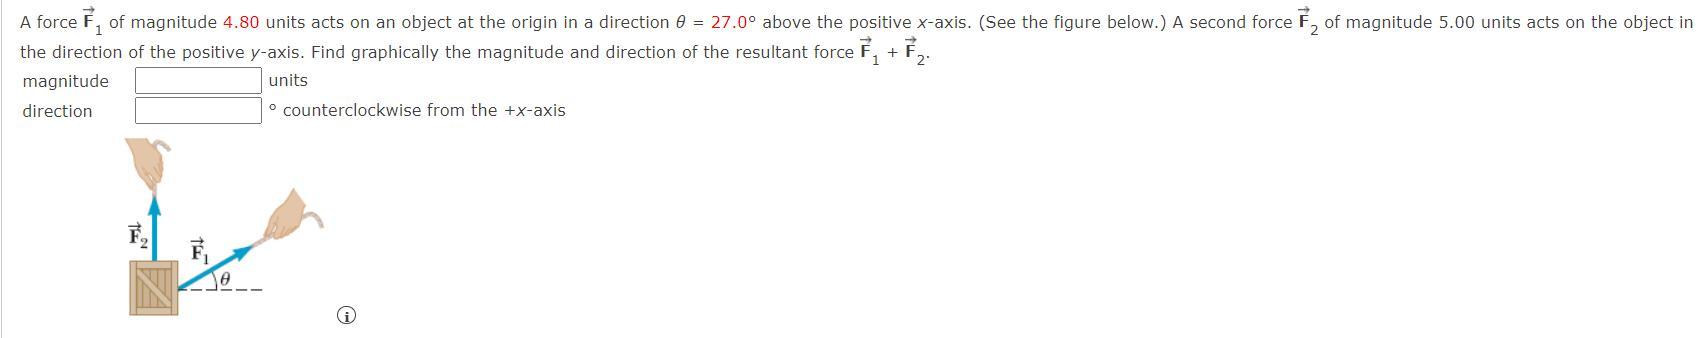 A Force F1 Of Magnitude 4.80 Units Acts On An Object At The Origin In A Direction = 27.0 Above The Positive